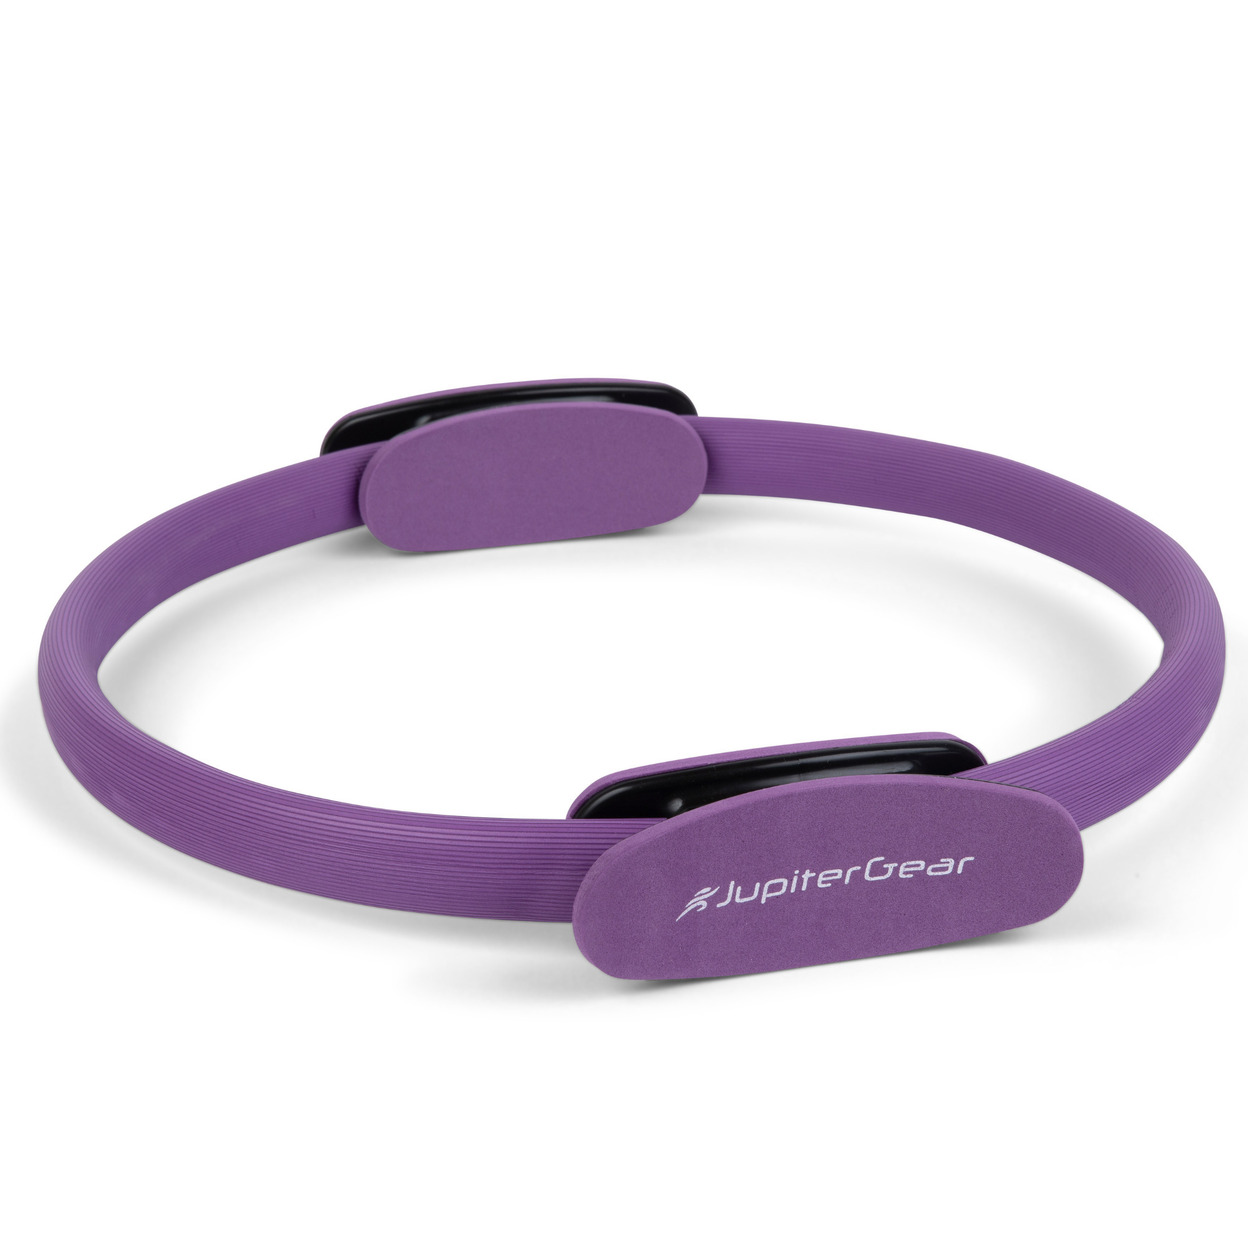 Pilates Resistance Ring For Strengthening Core Muscles - Purple